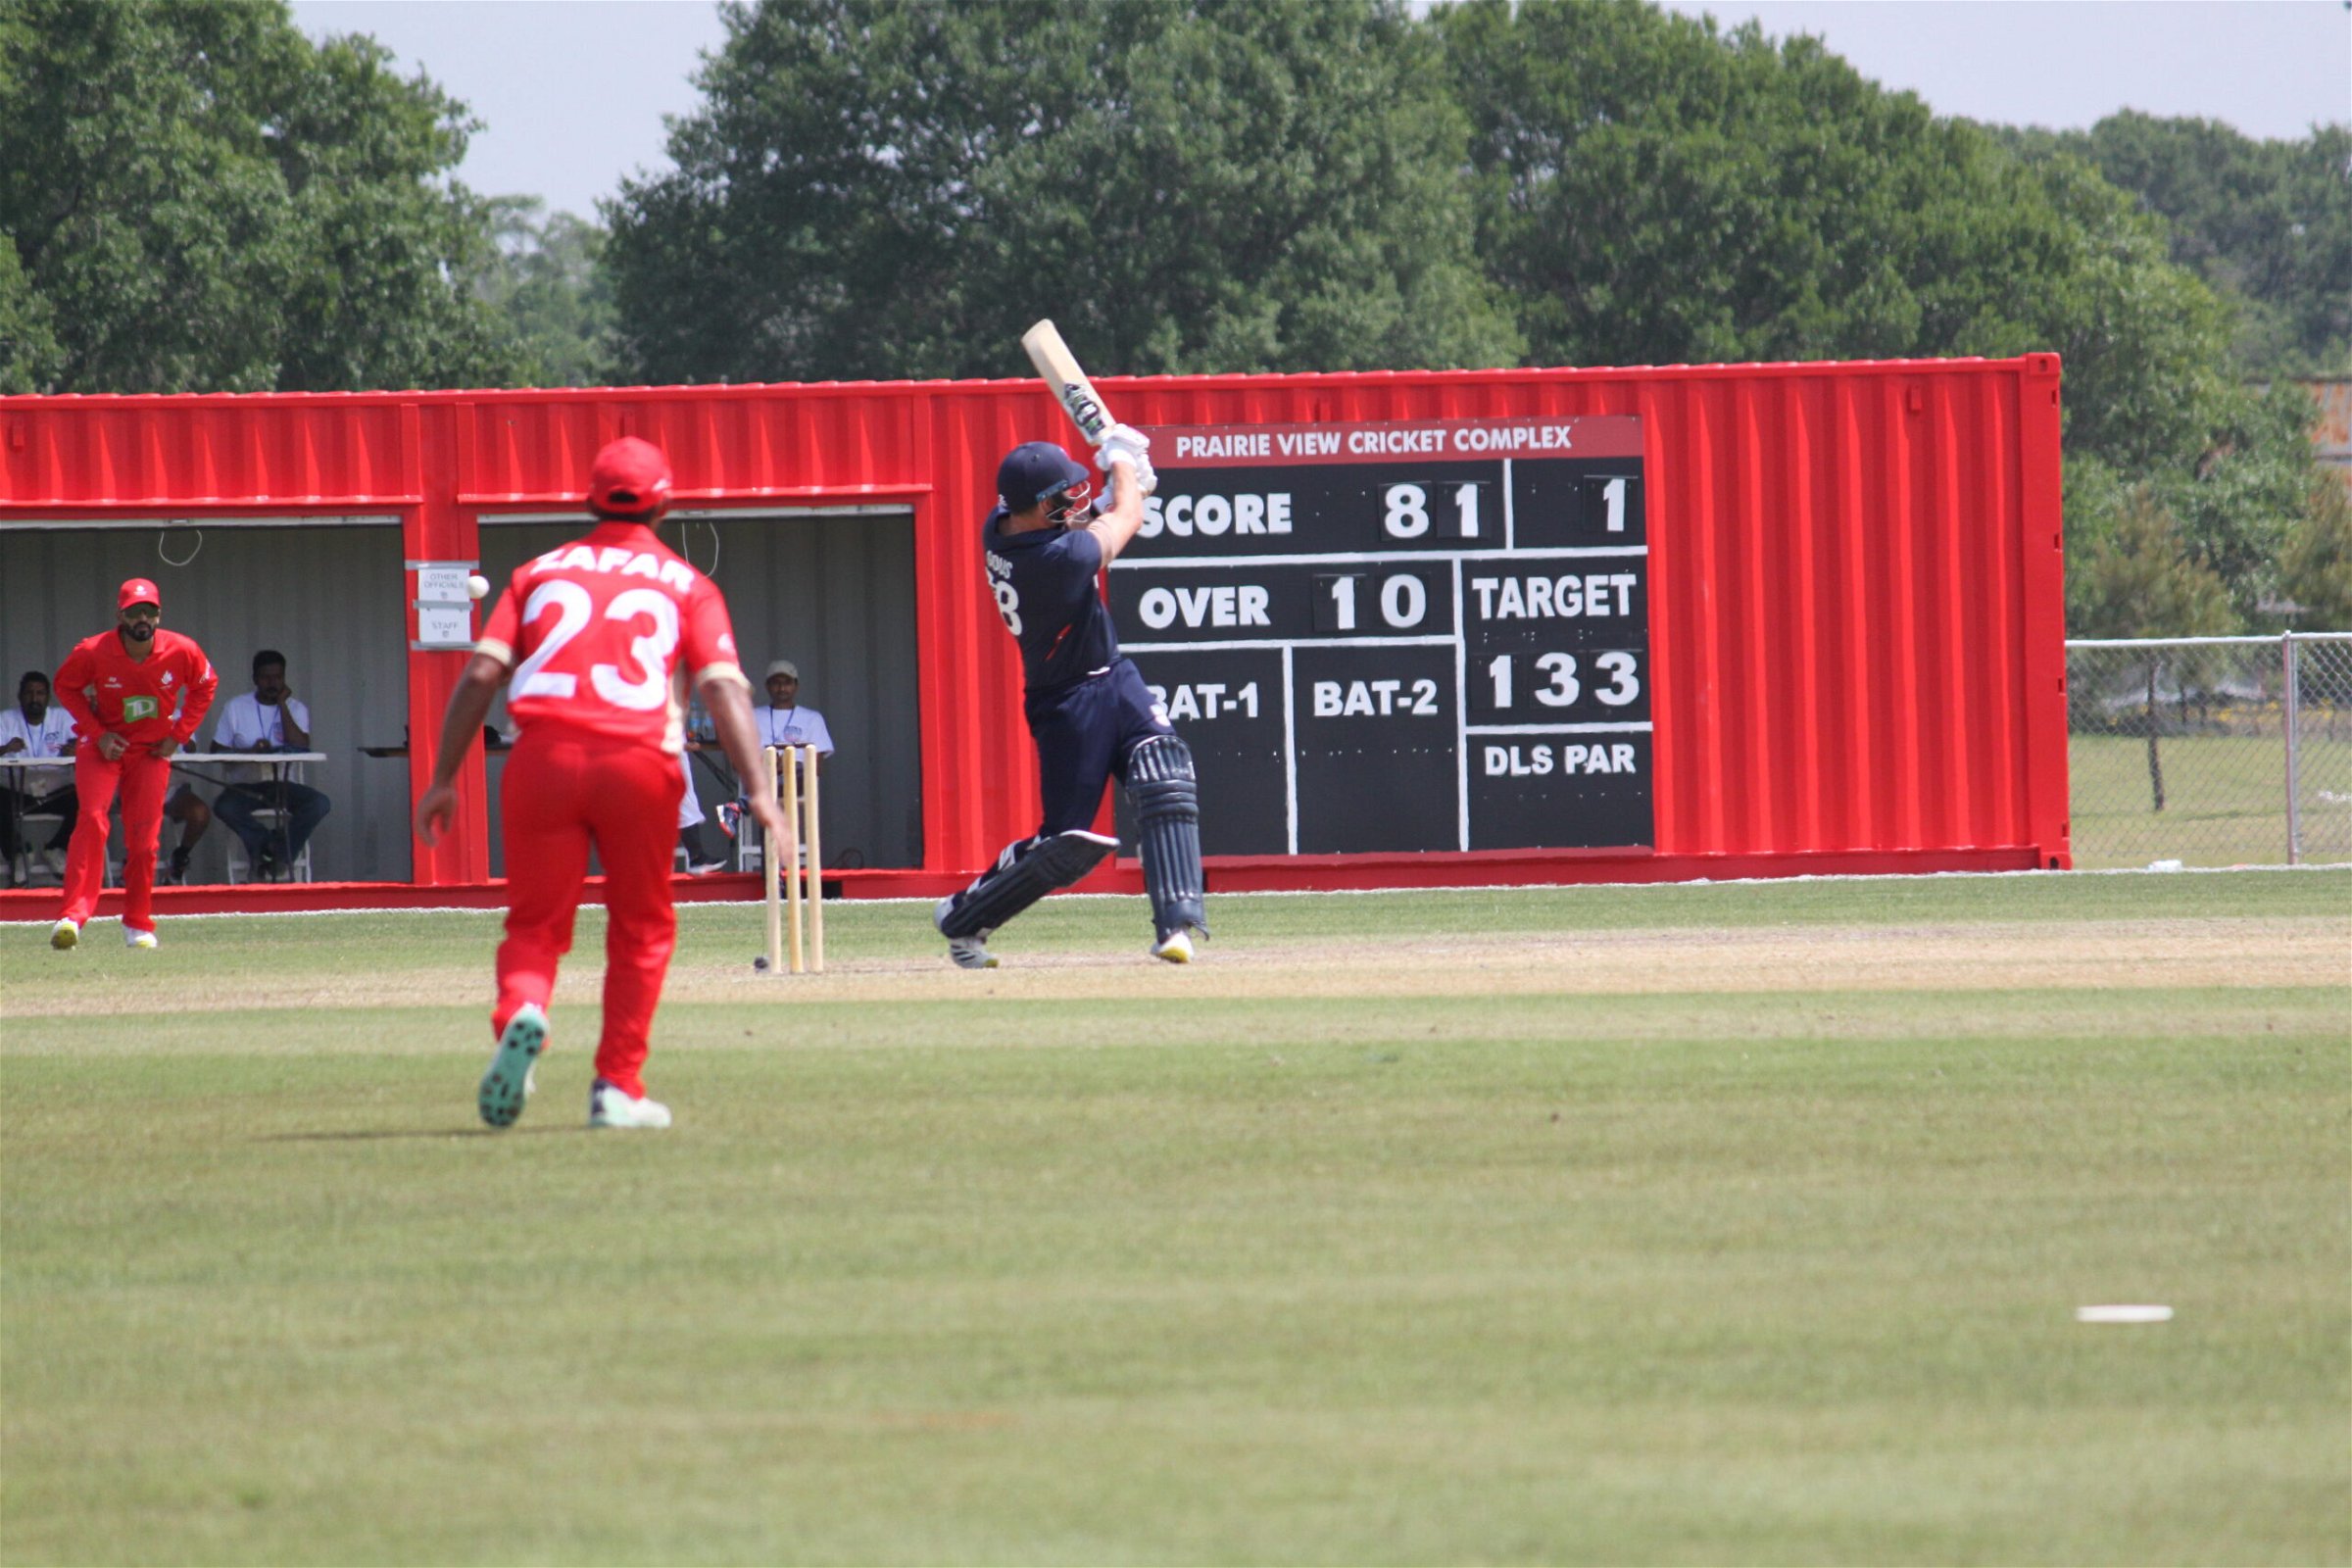 Monank Patel and Andries Gous hit first T20 International fifties in USA’s dominating win over Canada